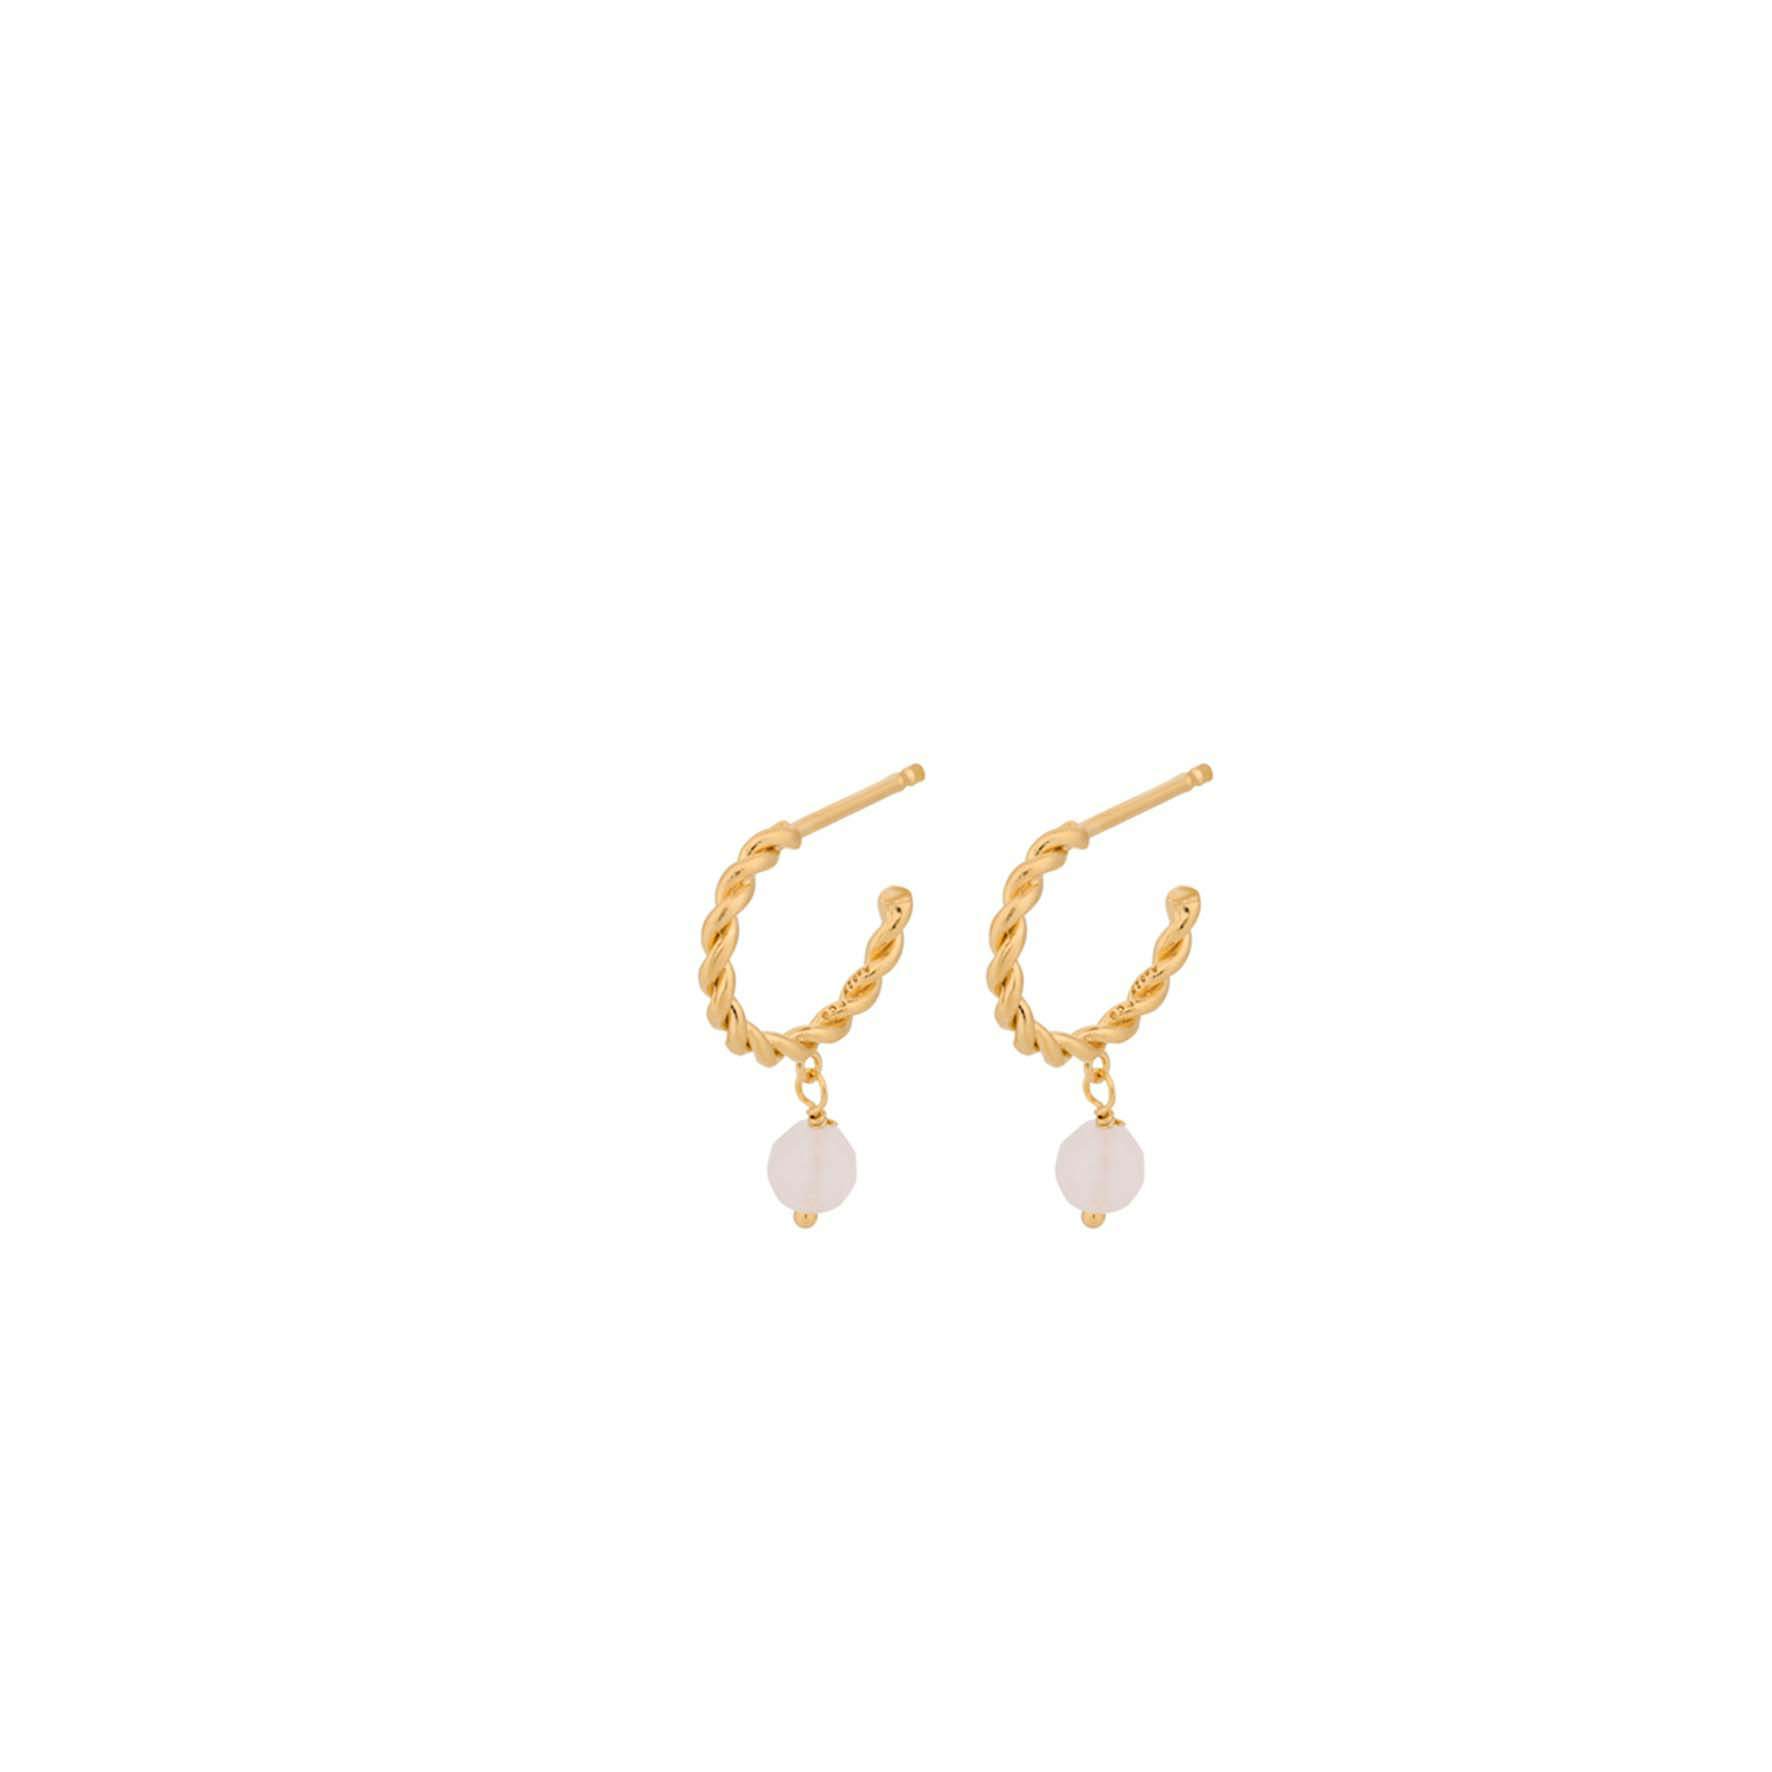 Cloudy Rose Hoops from Pernille Corydon in Goldplated-Silver Sterling 925